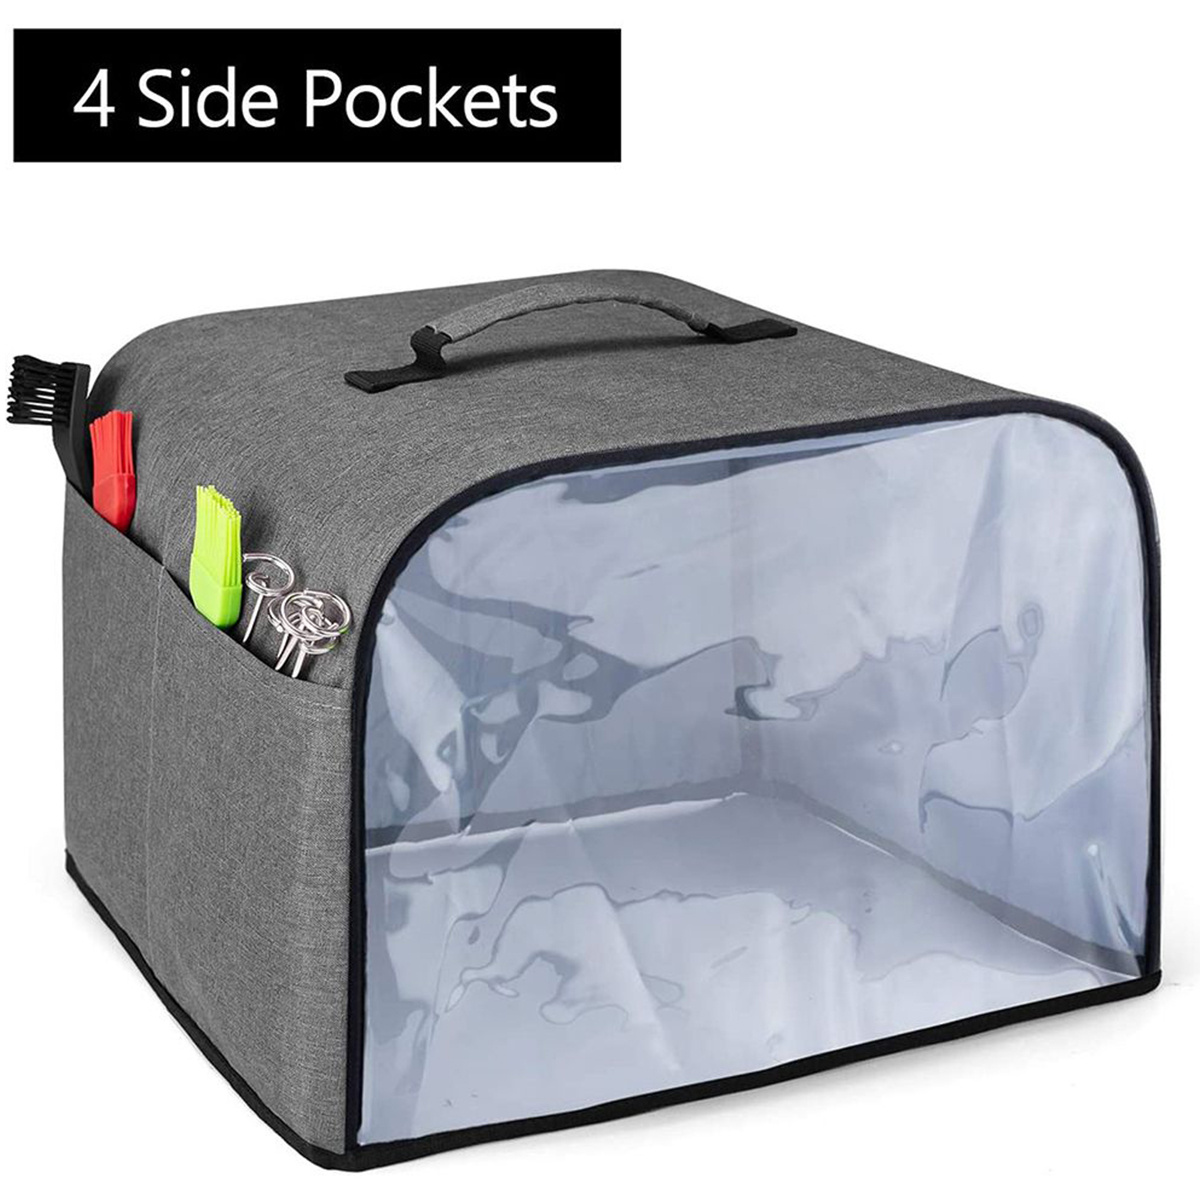 HOMEST Blender Dust Cover with Accessory Pocket Compatible with Ninja Foodi, Grey (Patent Pending), Gray